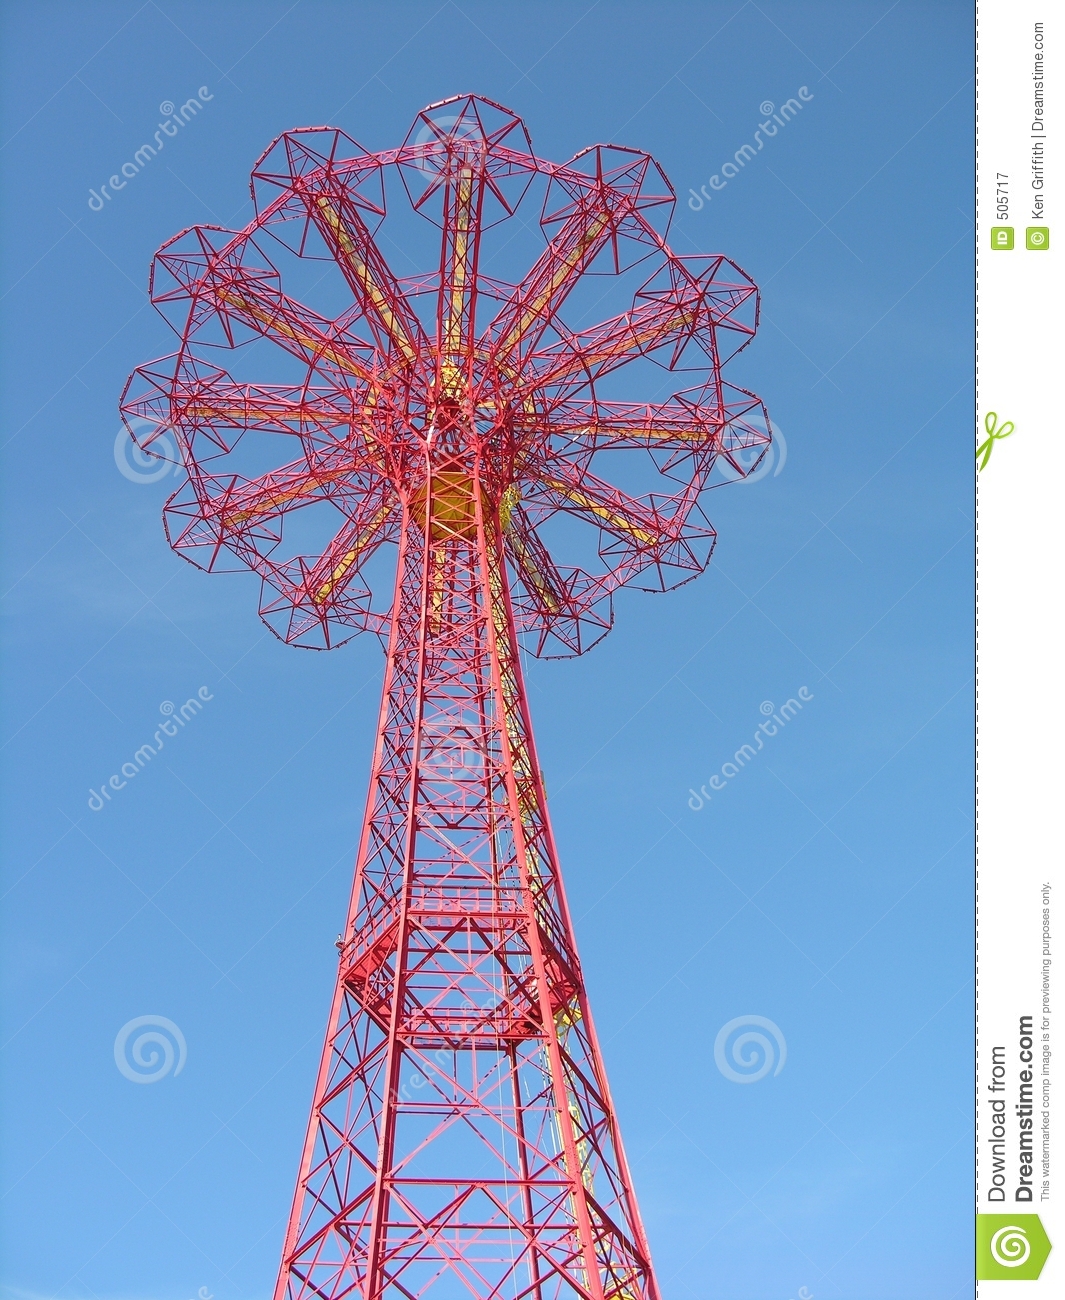 Parachute Drop Tower Royalty Free Stock Photography   Image  505717